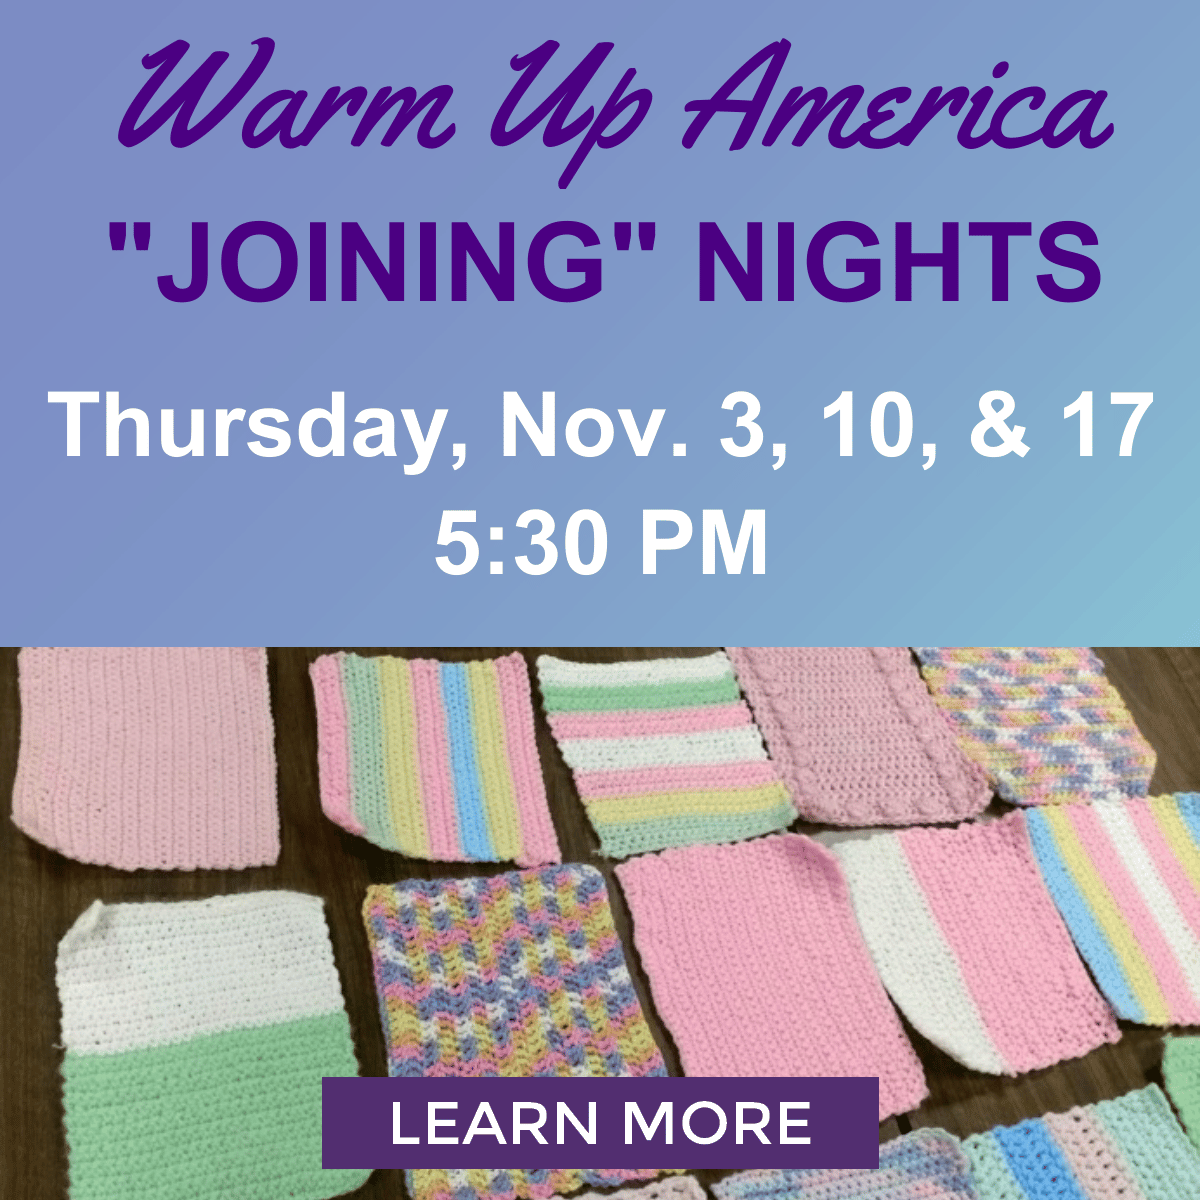 Warm Up America Joining Nights, Thursday, Nov. 3, 10 & 17, 5:30 pm. Image of knitted and crocheted rectangles